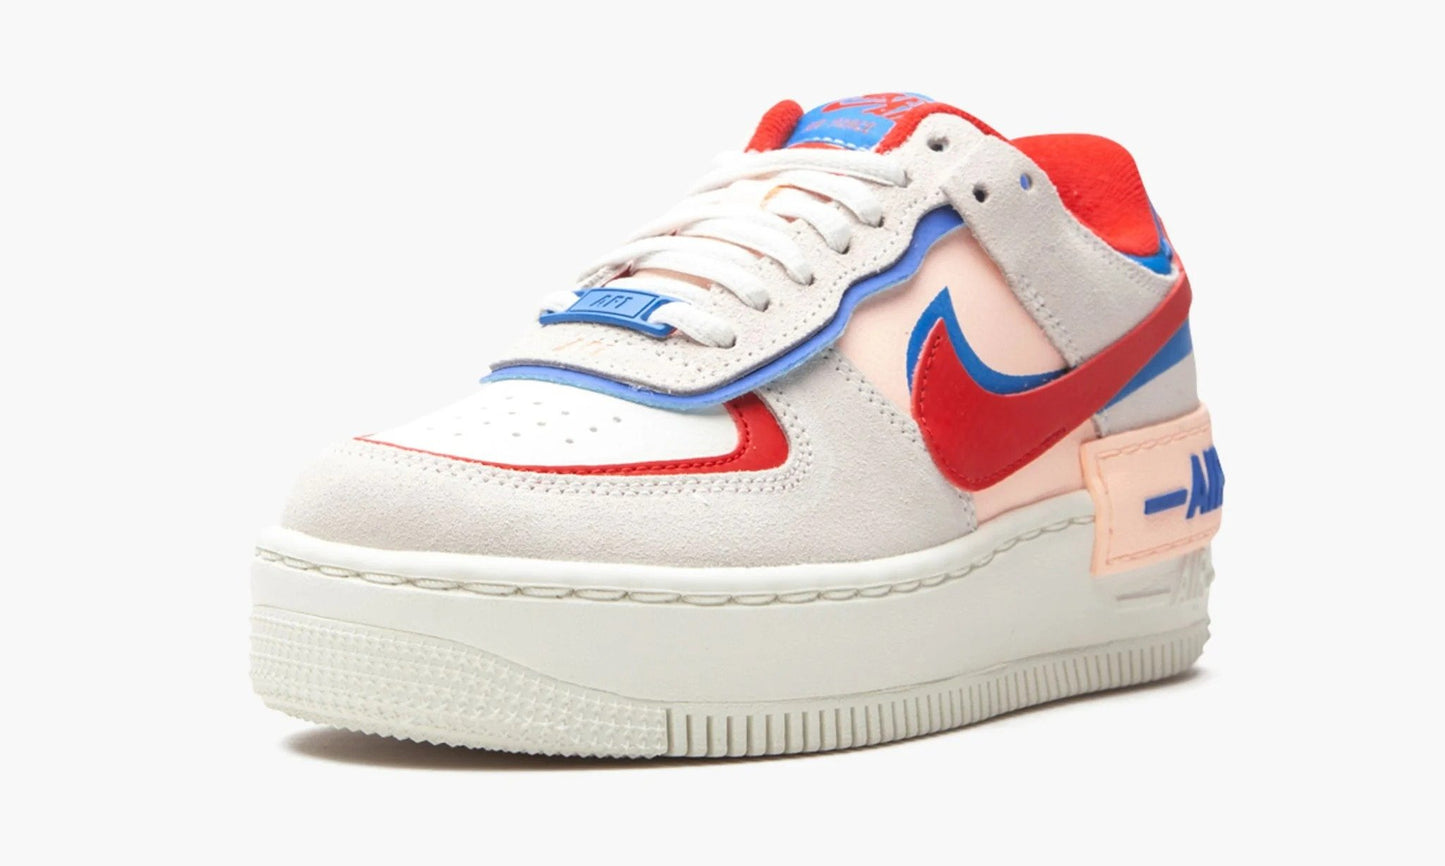 Force 1 Low Shadow WMNS “Sail”